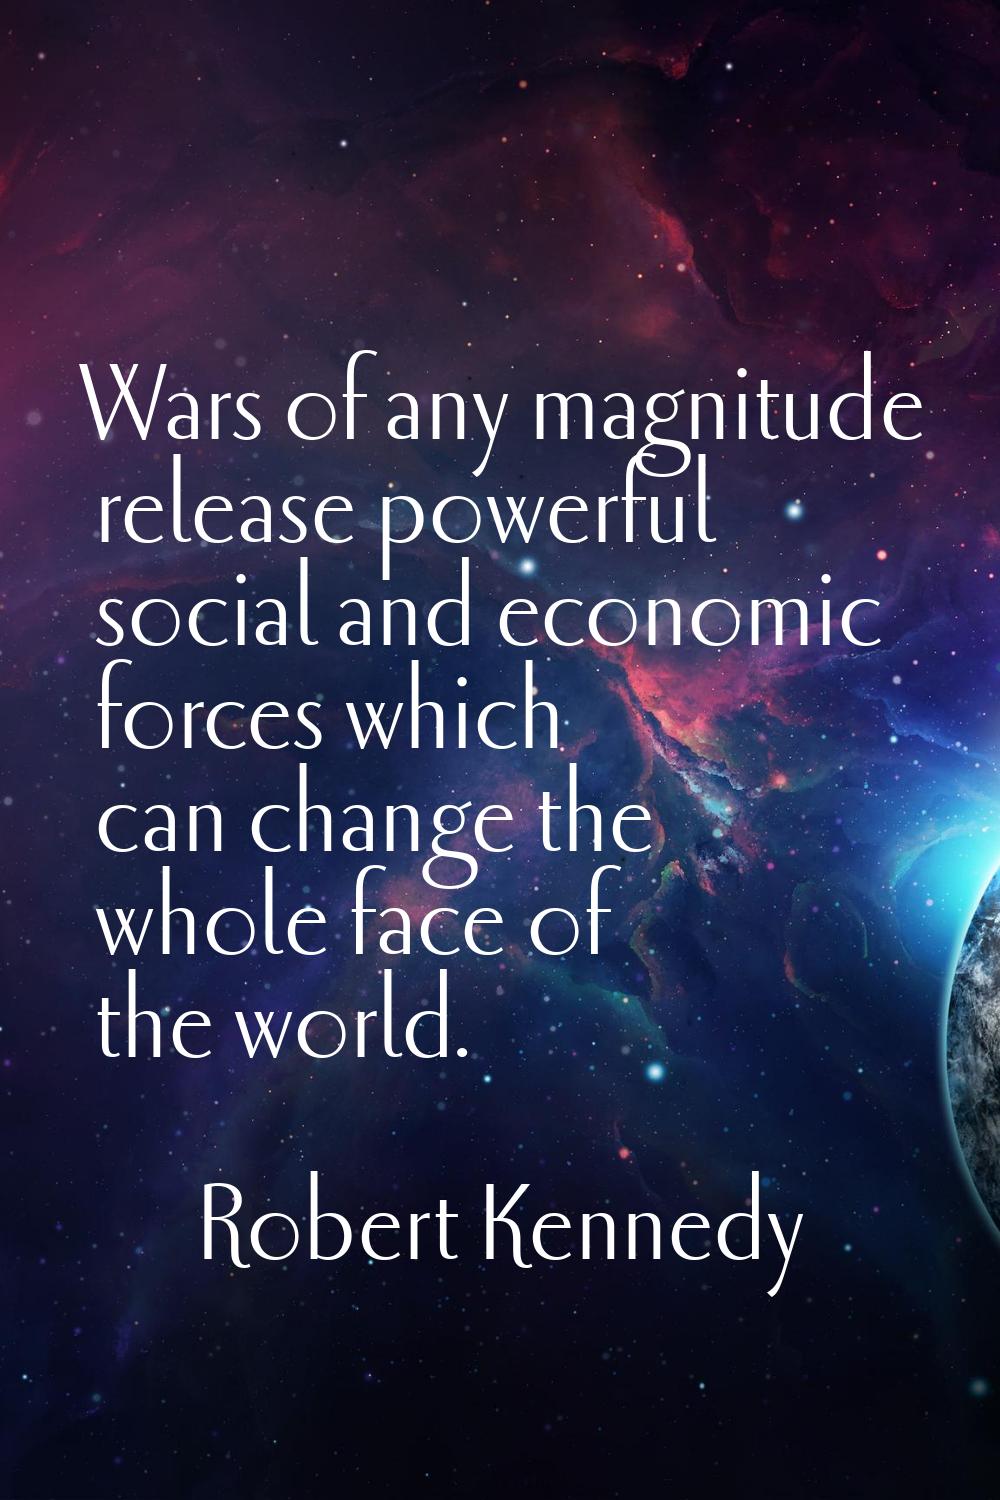 Wars of any magnitude release powerful social and economic forces which can change the whole face o